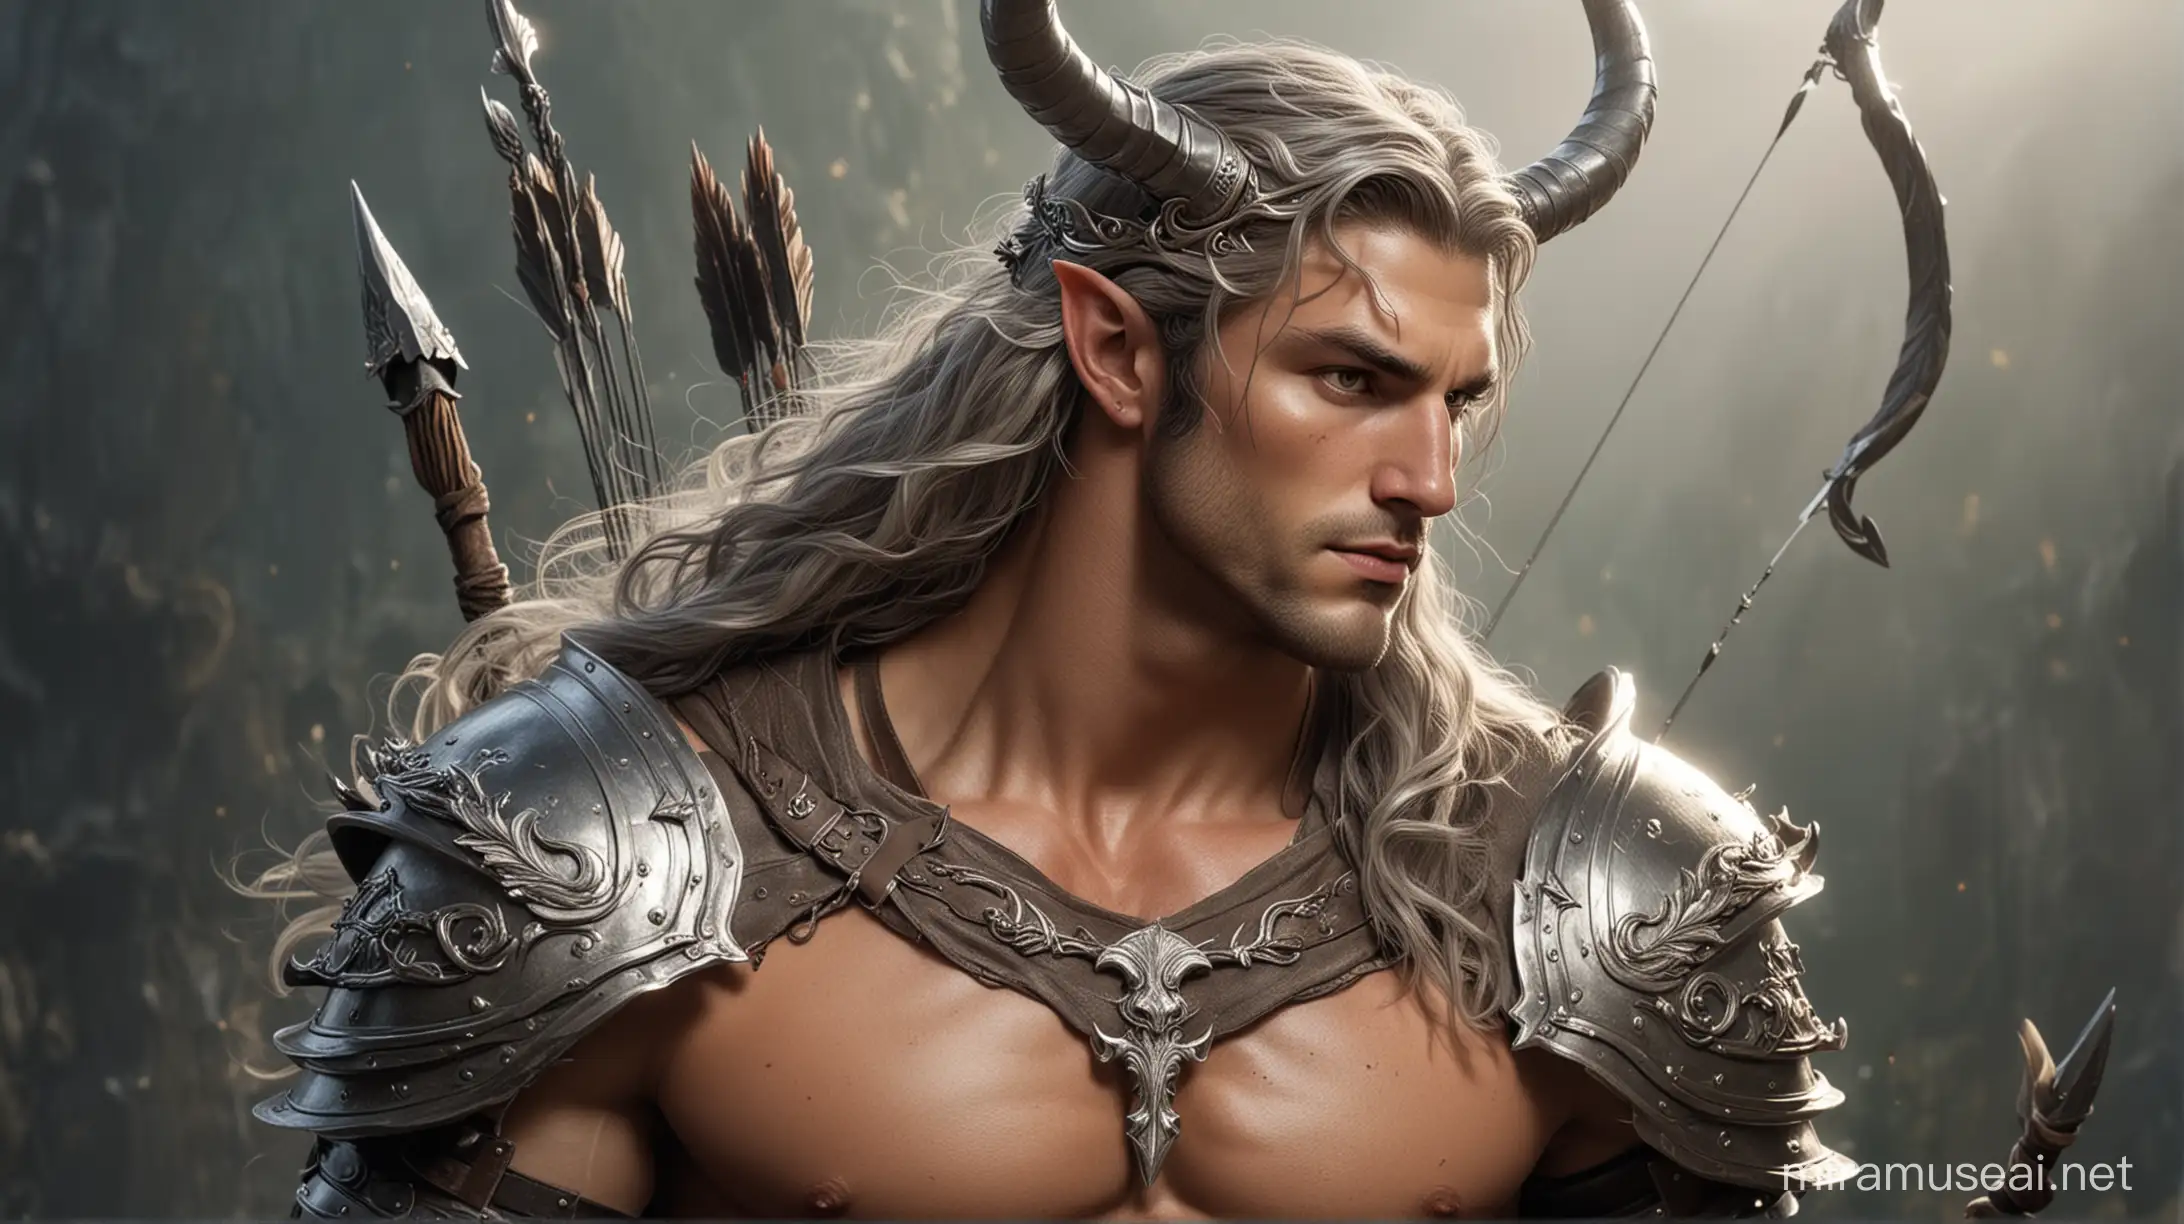 A  mythical centaur man with curled back horns, a strong body, well defined face, grey eyes, flowing long hair, he wears armor strap across his chest with bow and arrows, wears a silver crown, fantasy appearance